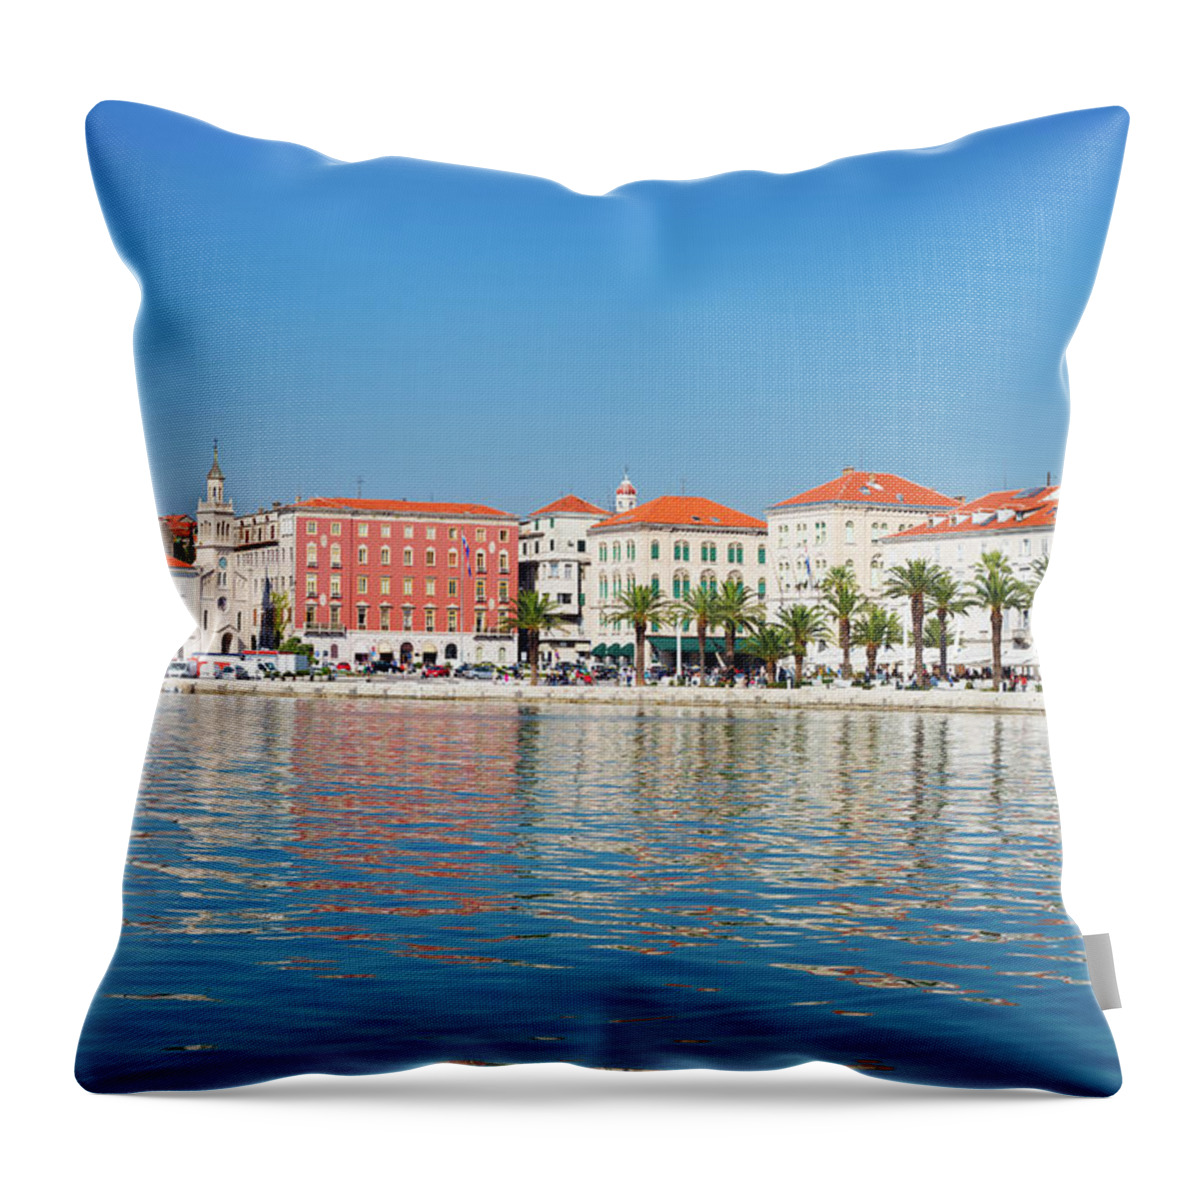 Downtown District Throw Pillow featuring the photograph Split, Croatia by Benedek